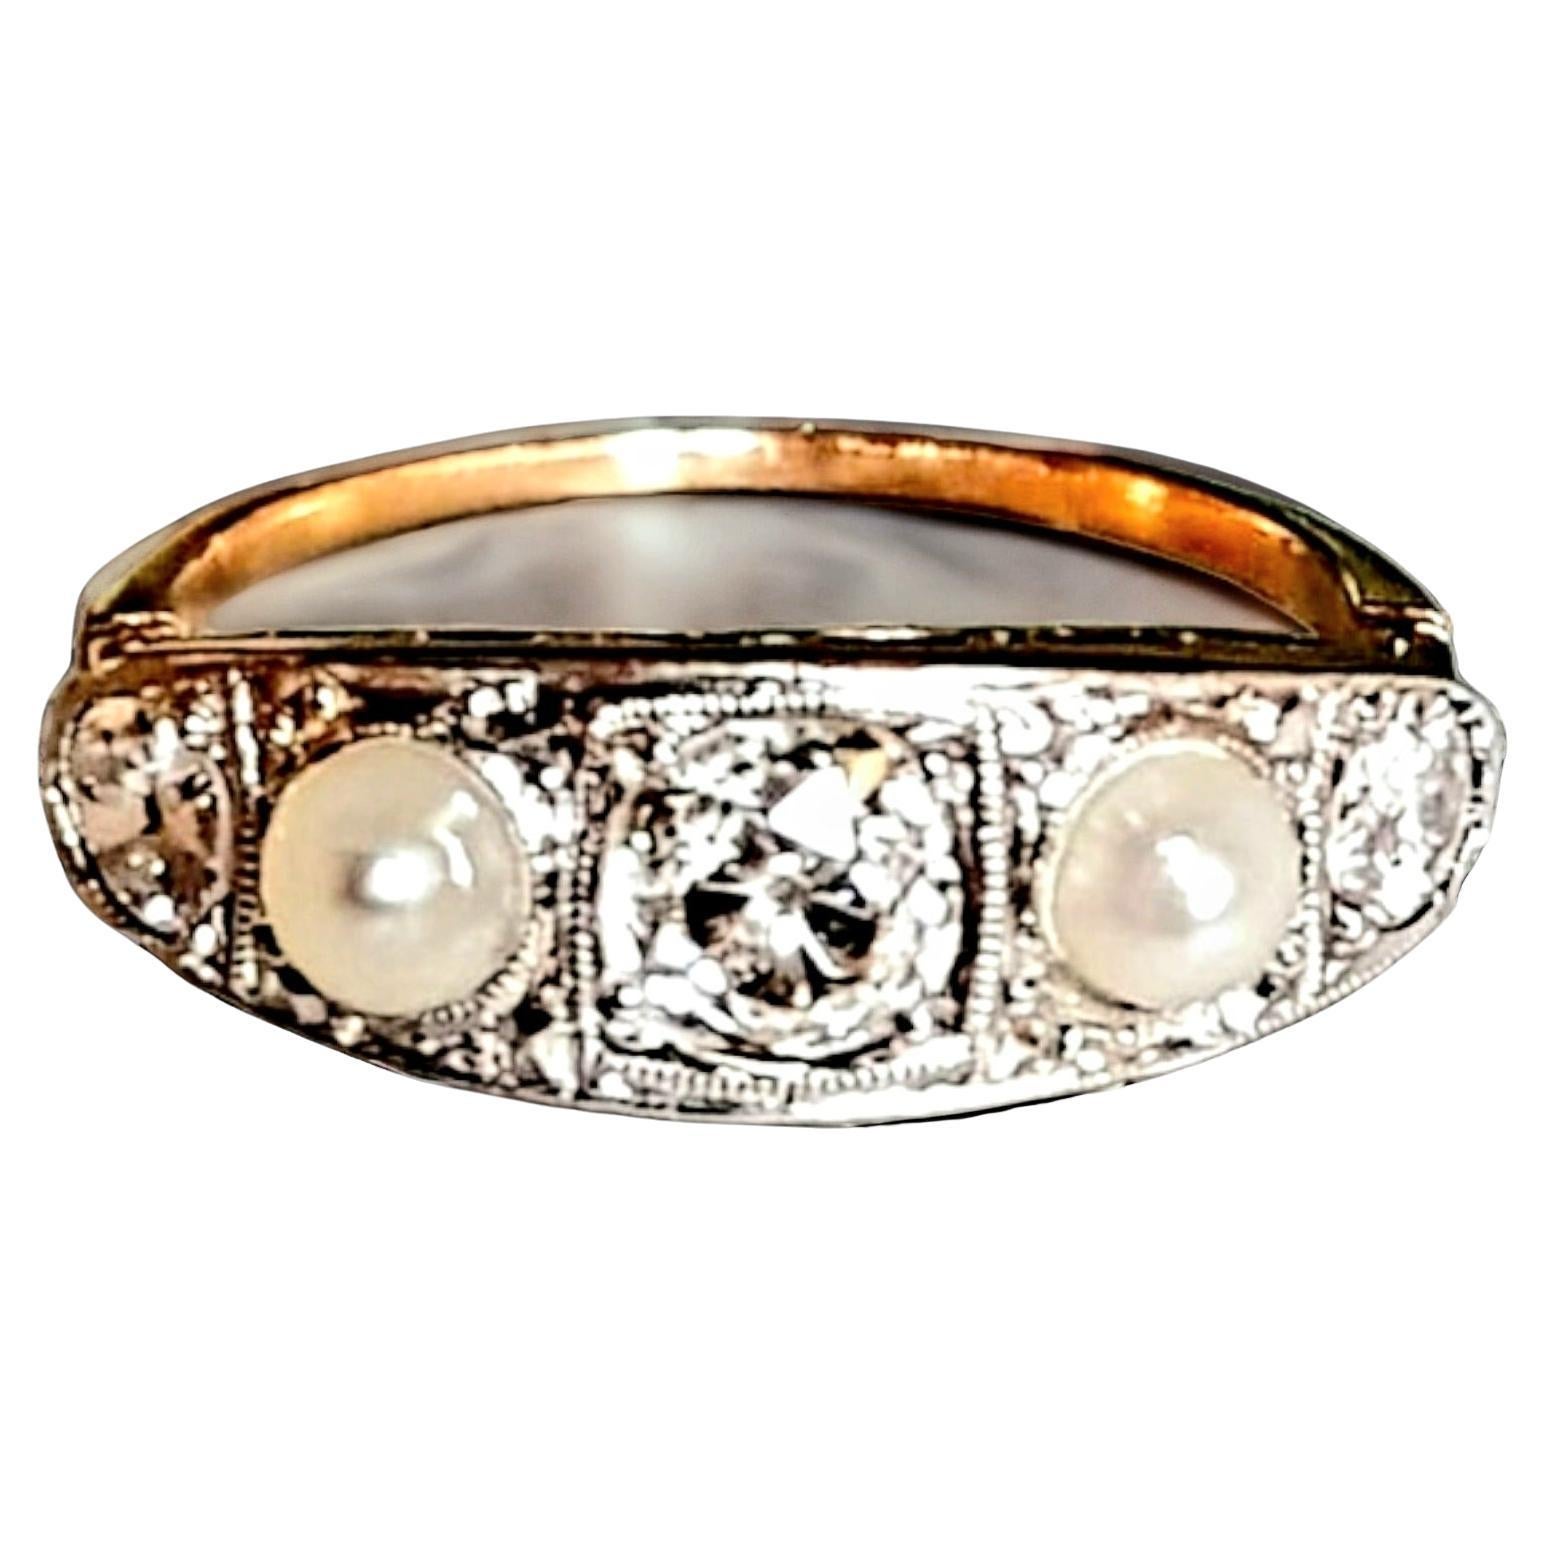 Edwardian Diamond and Pearl Five Stone Ring (1901-1915)